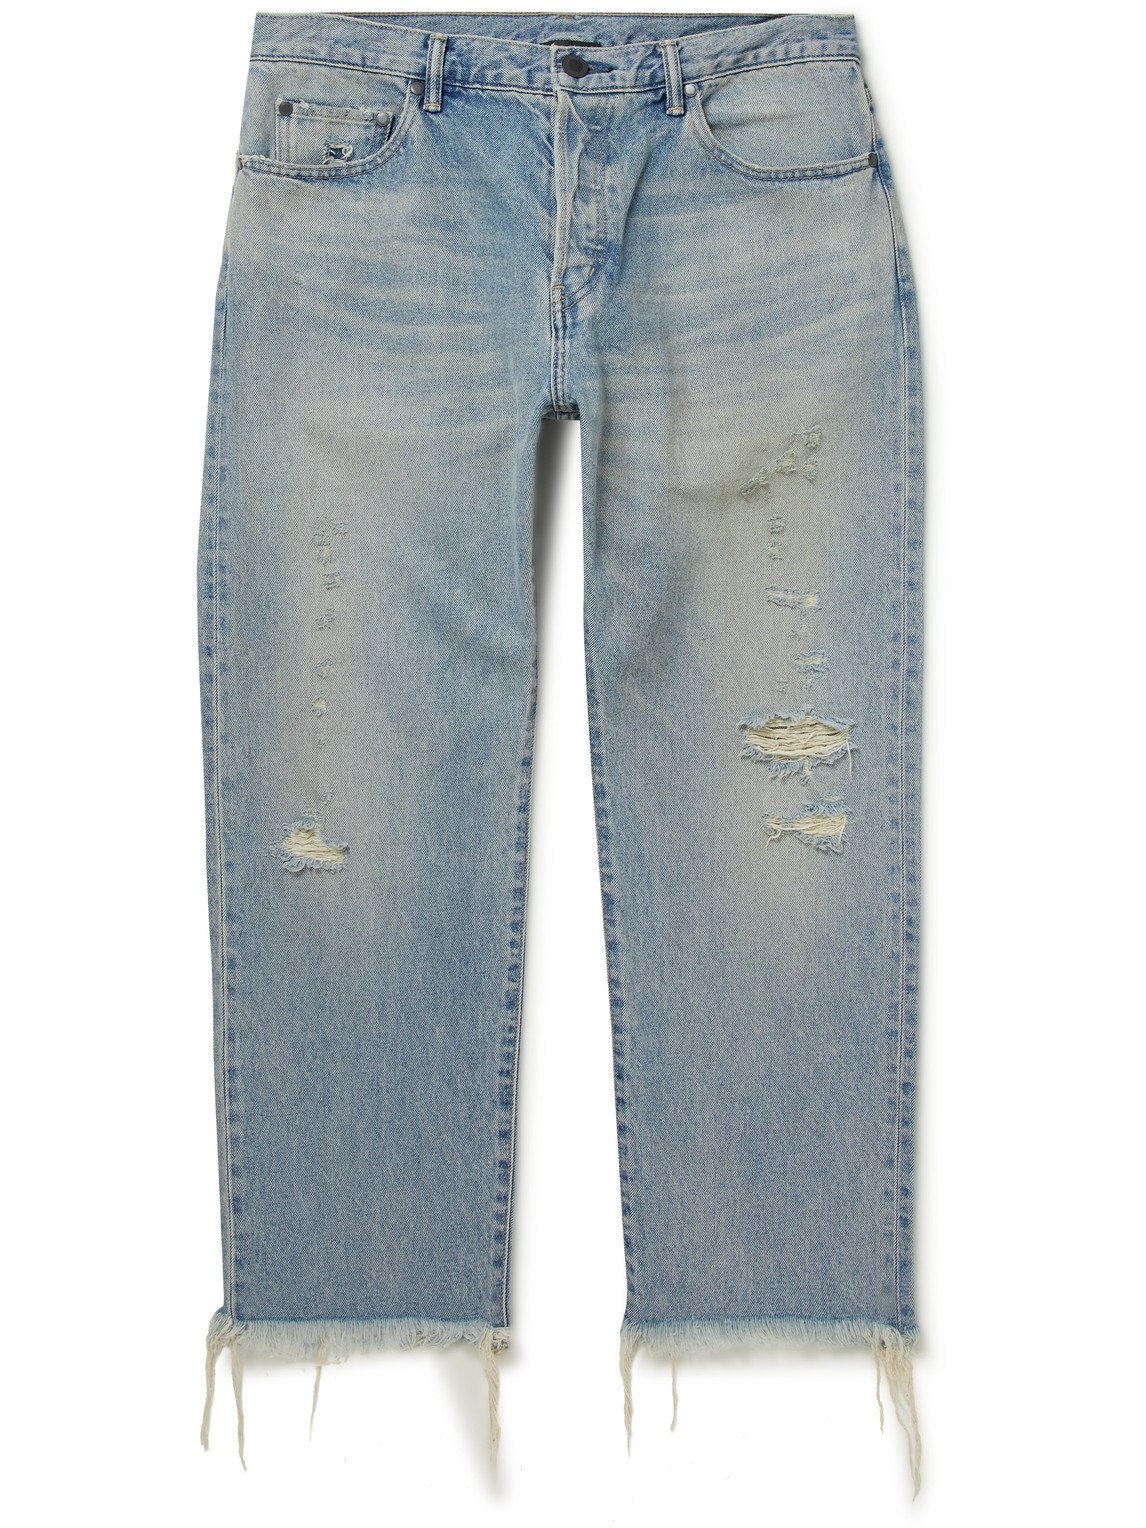 The Kane 2 Distressed Jeans